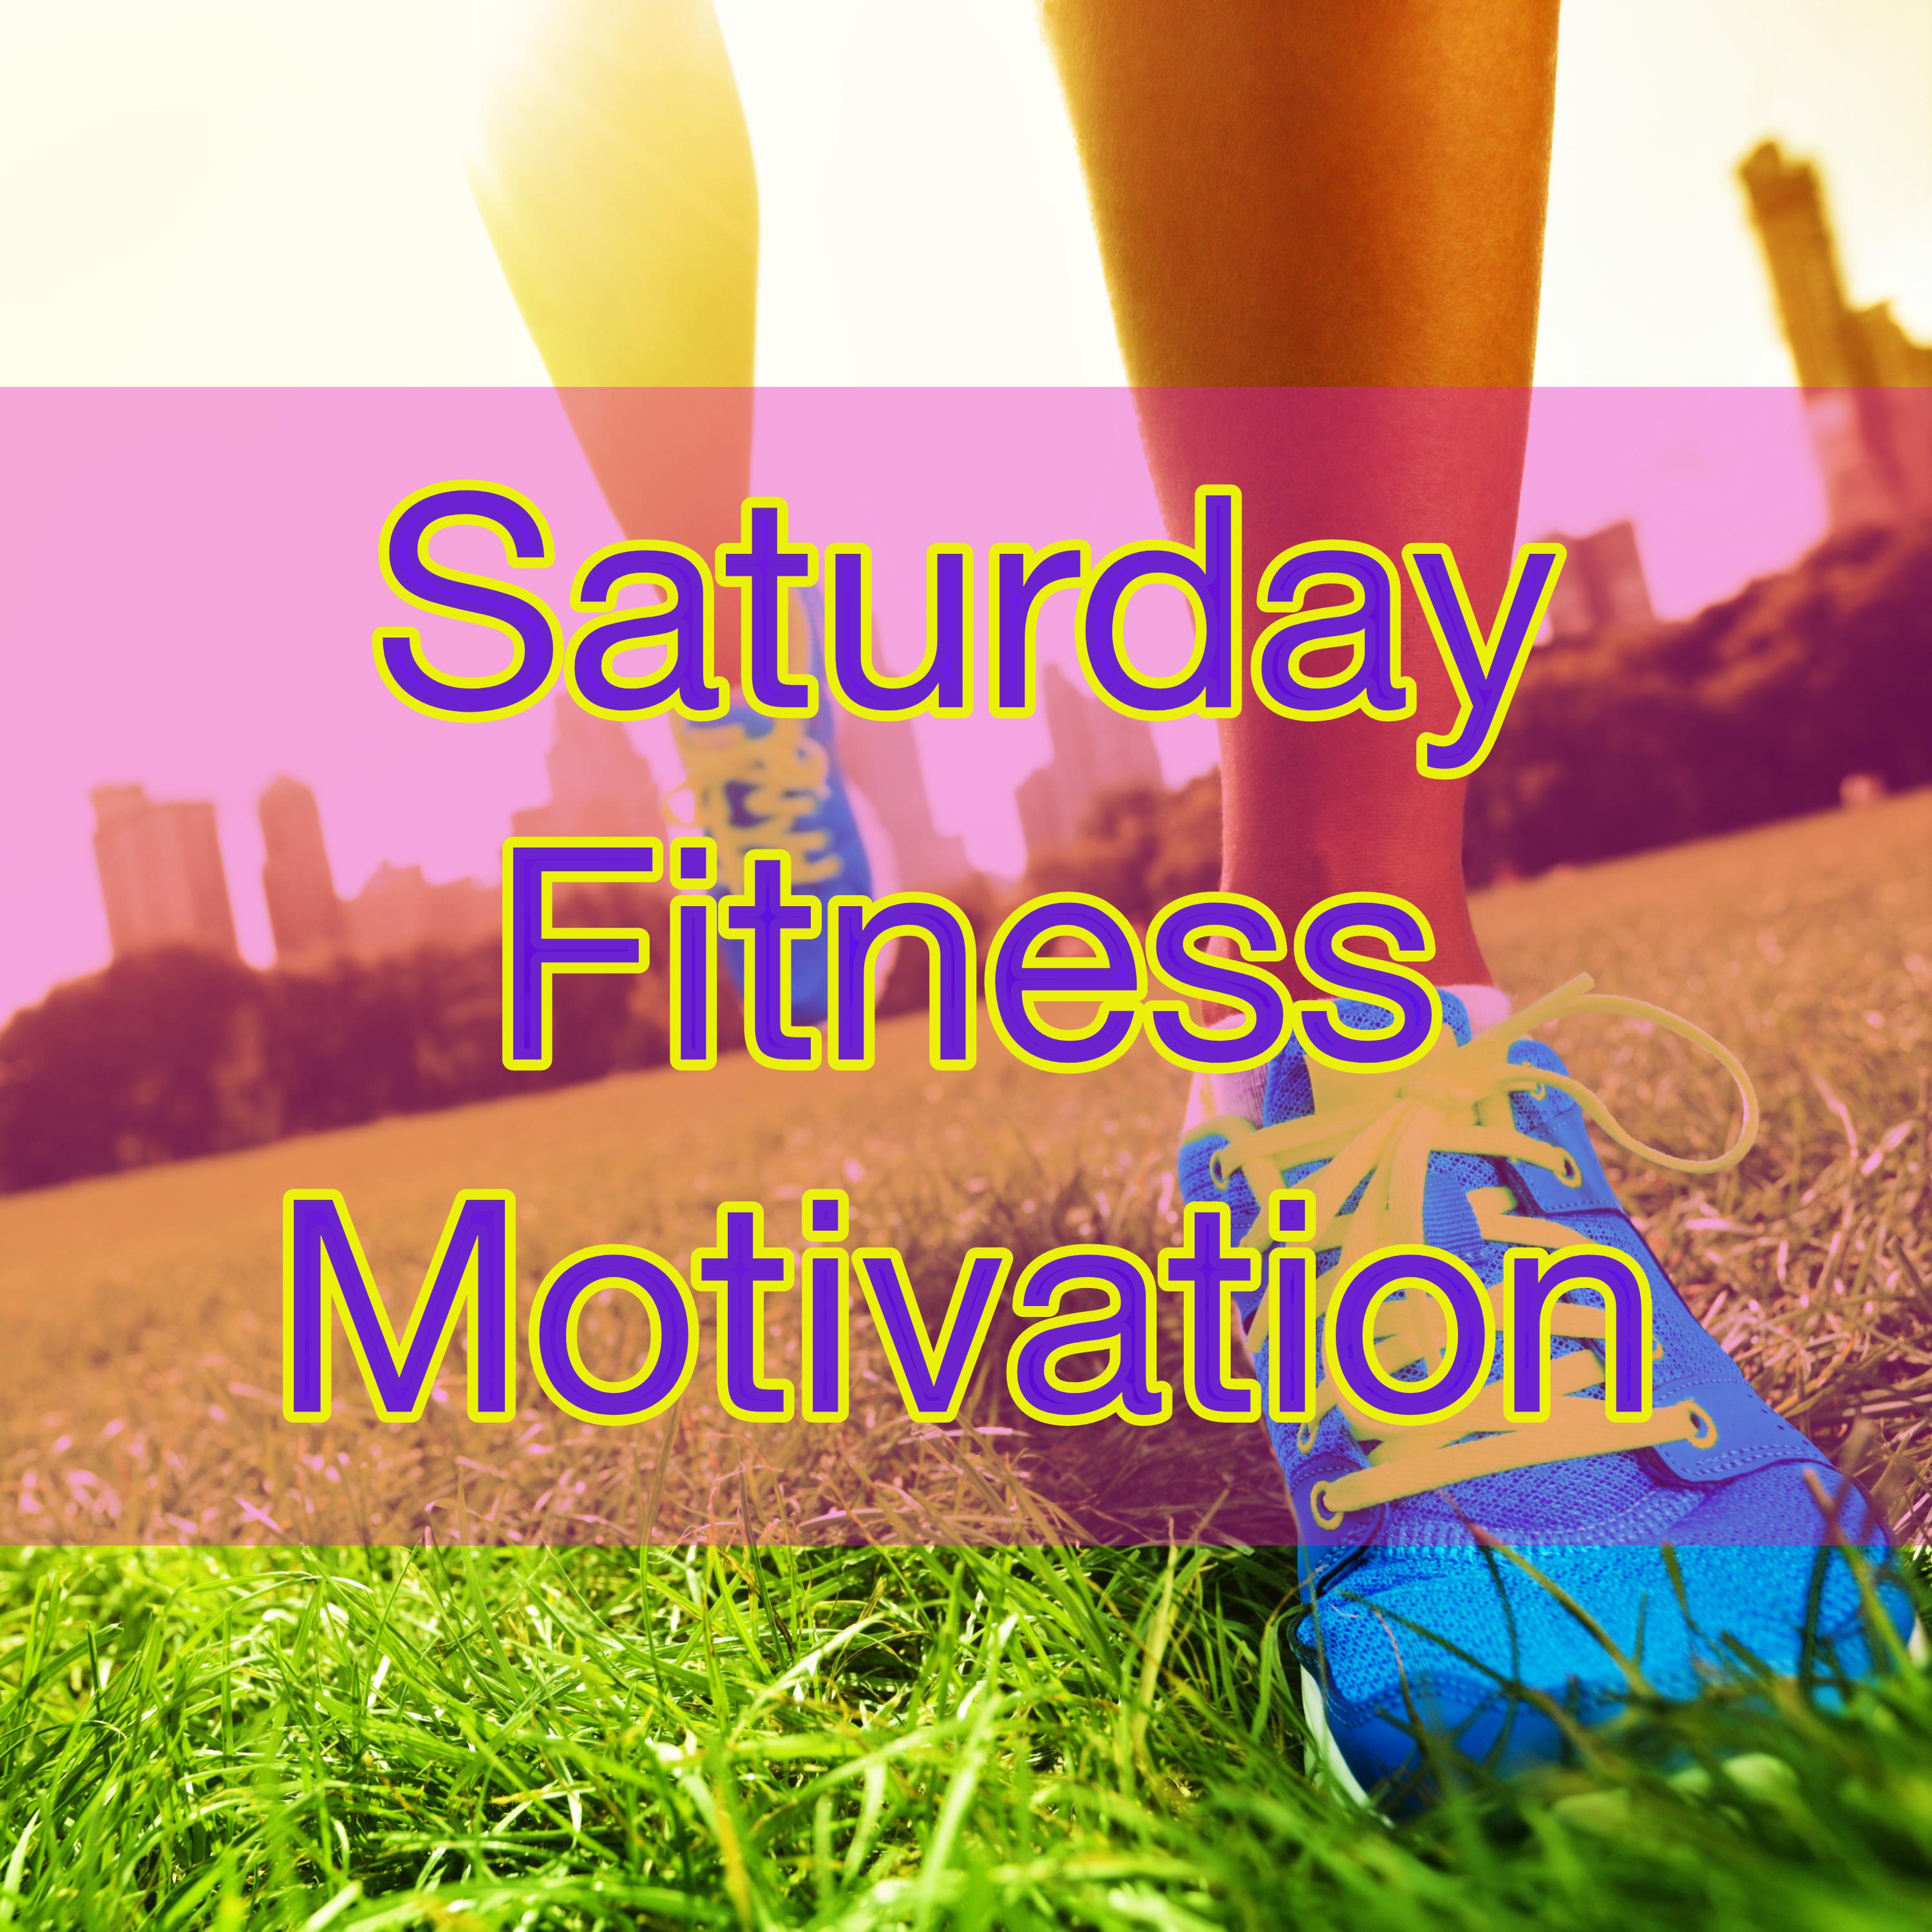 Saturday Fitness Motivation  Jumping, Running and Fast Walking Electronic Songs for Suturday Morning Fitness